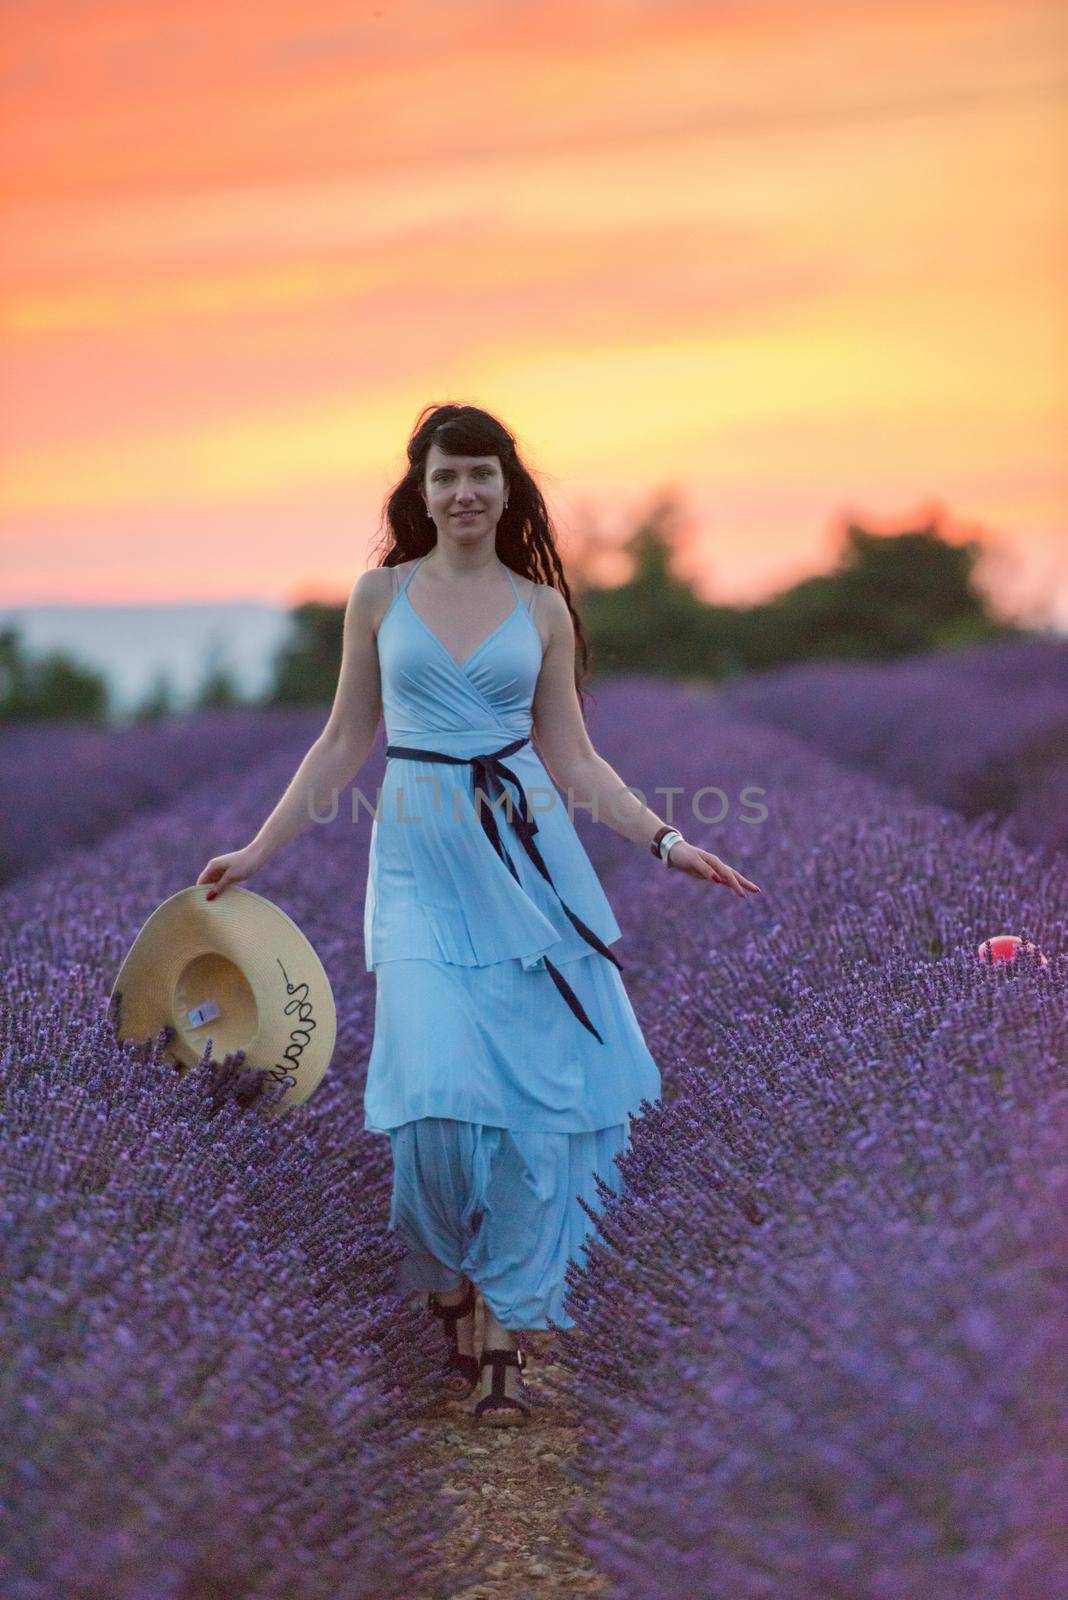 woman portrait in lavender flower fiel in sunset and night time